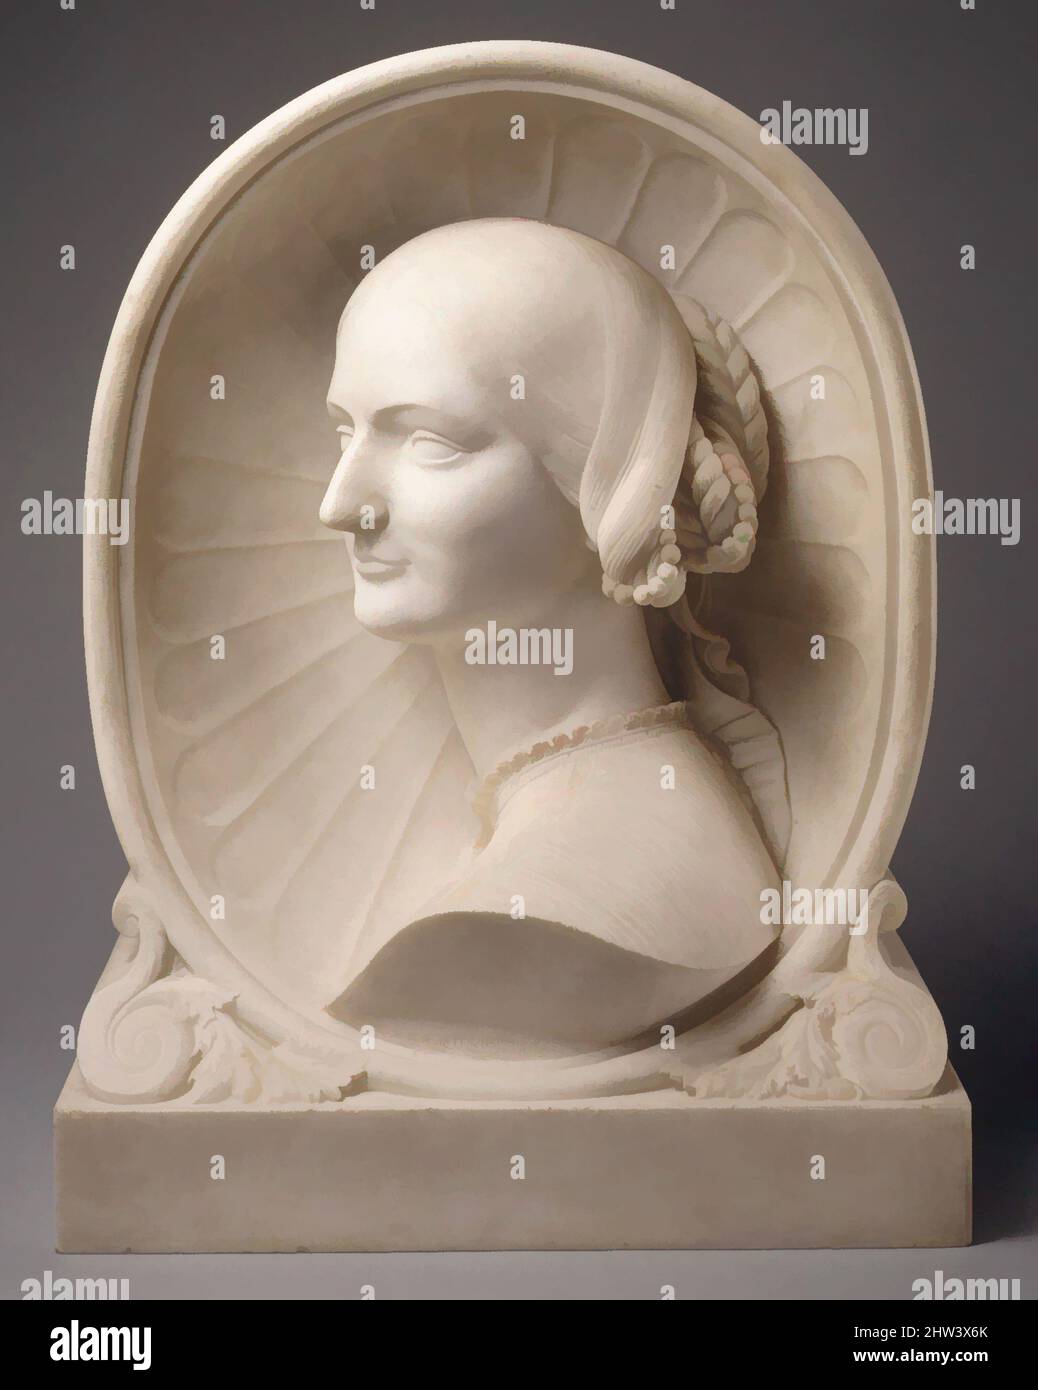 Art inspired by Portrait of a young woman, 1850, French, Marble, 22 7/8 x 17 x 8 in. (58.1 x 43.2 x 20.3 cm), Sculpture, Henri-Baron de Triqueti (French, 1804–1874), The subject may be the sculptor's English-born wife, Classic works modernized by Artotop with a splash of modernity. Shapes, color and value, eye-catching visual impact on art. Emotions through freedom of artworks in a contemporary way. A timeless message pursuing a wildly creative new direction. Artists turning to the digital medium and creating the Artotop NFT Stock Photo